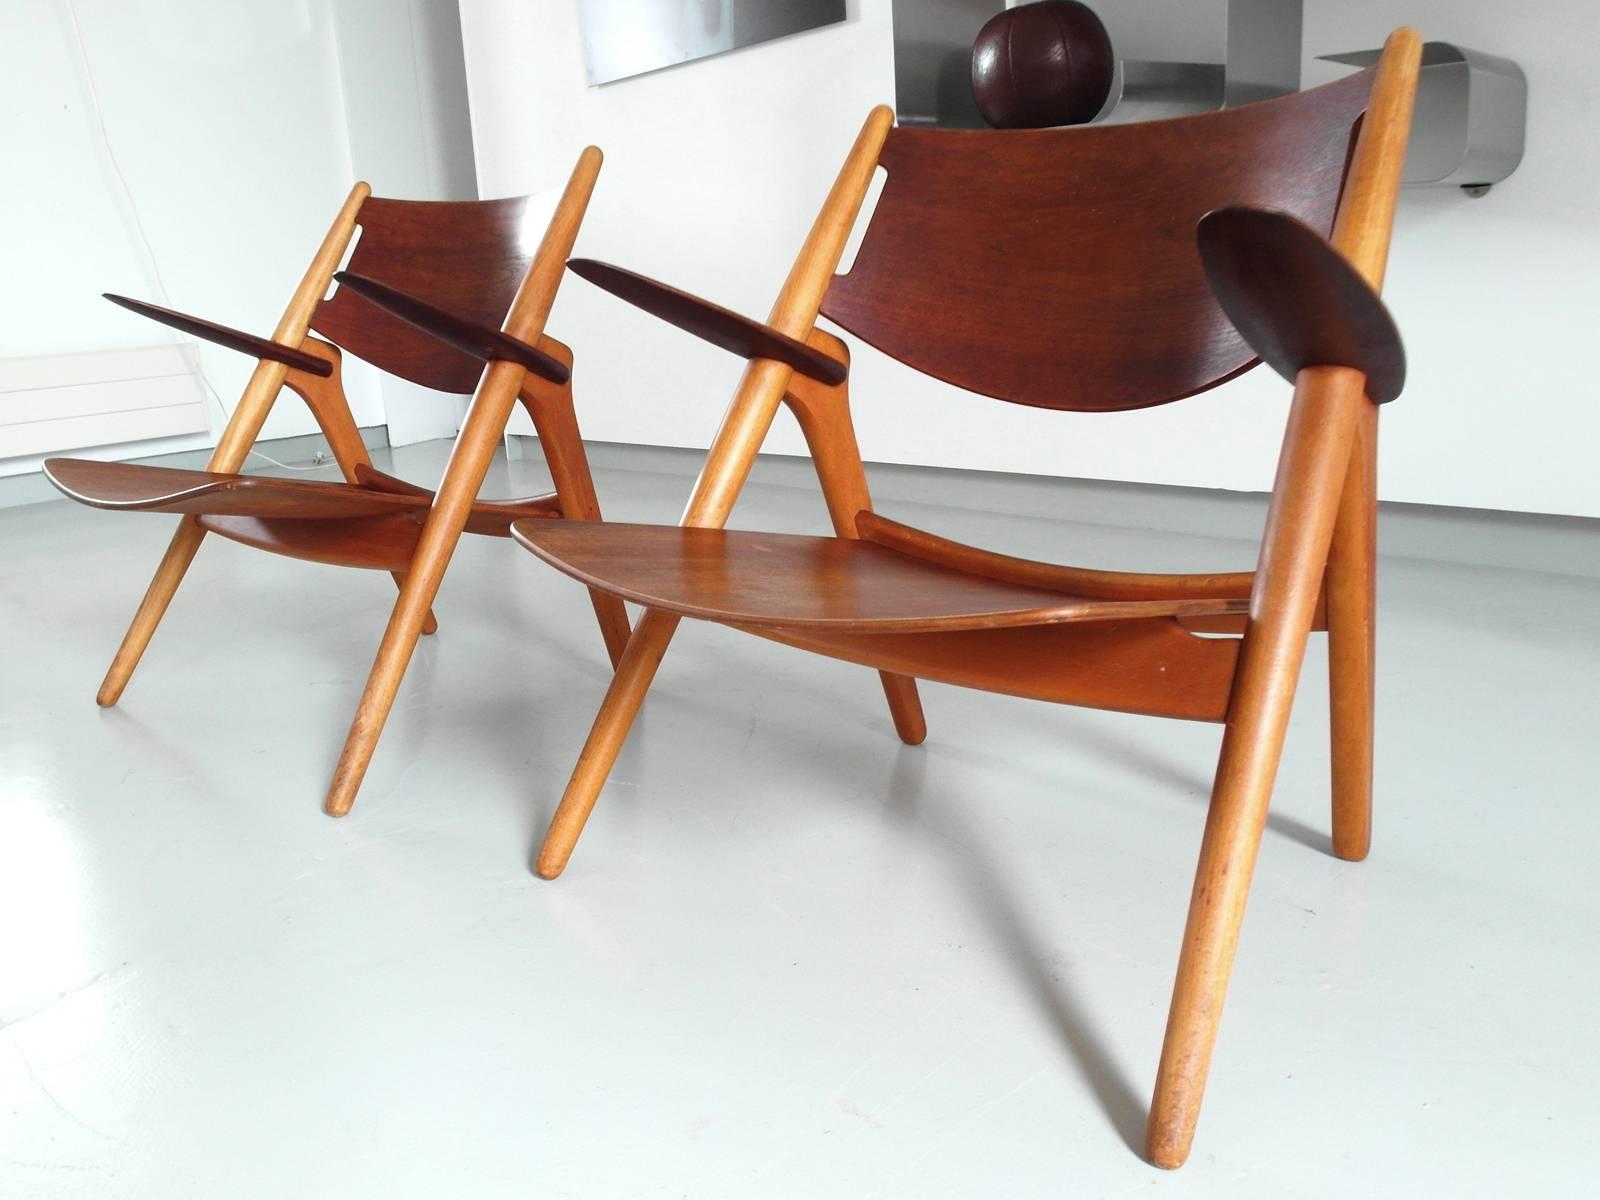 Amazing and rare pair of early lounge chairs model CH-28, or Sawbuck chairs designed by Hans J. Wegner for Carl Hansen, Denmark 1951. 
Beautiful old chairs in solid oak and teak plywood with wonderful wood grain and patina. Smooth clean lines and